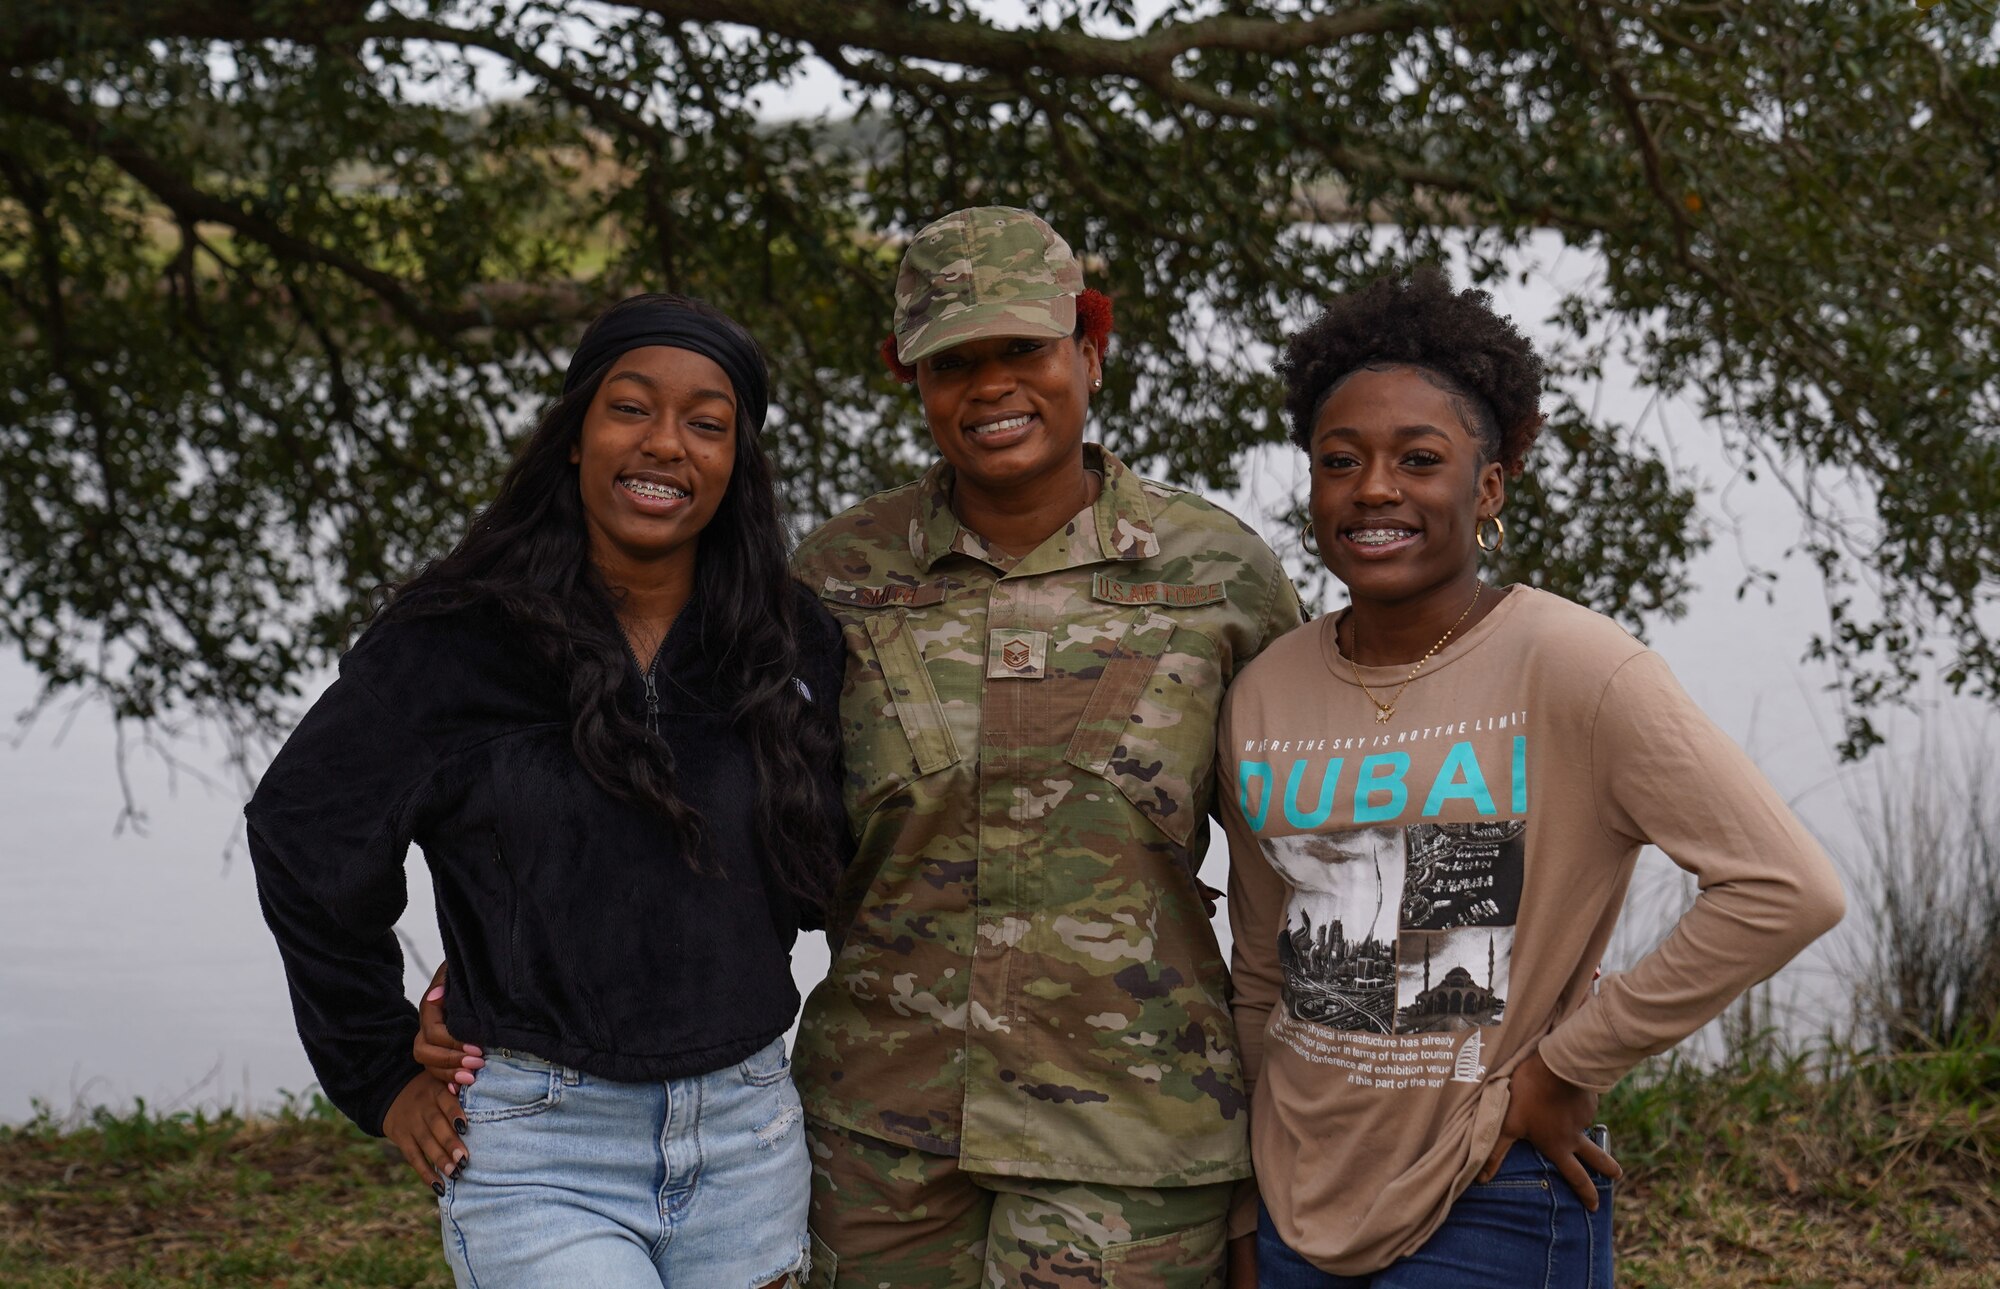 U.S. Air Force Master Sgt. Natasha Smith, 81st Healthcare Operations Squadron internal medicine flight chief, and her daughters, Kaiya and Iyana, pose together at Marina Park on Keesler Air Force Base, Mississippi.